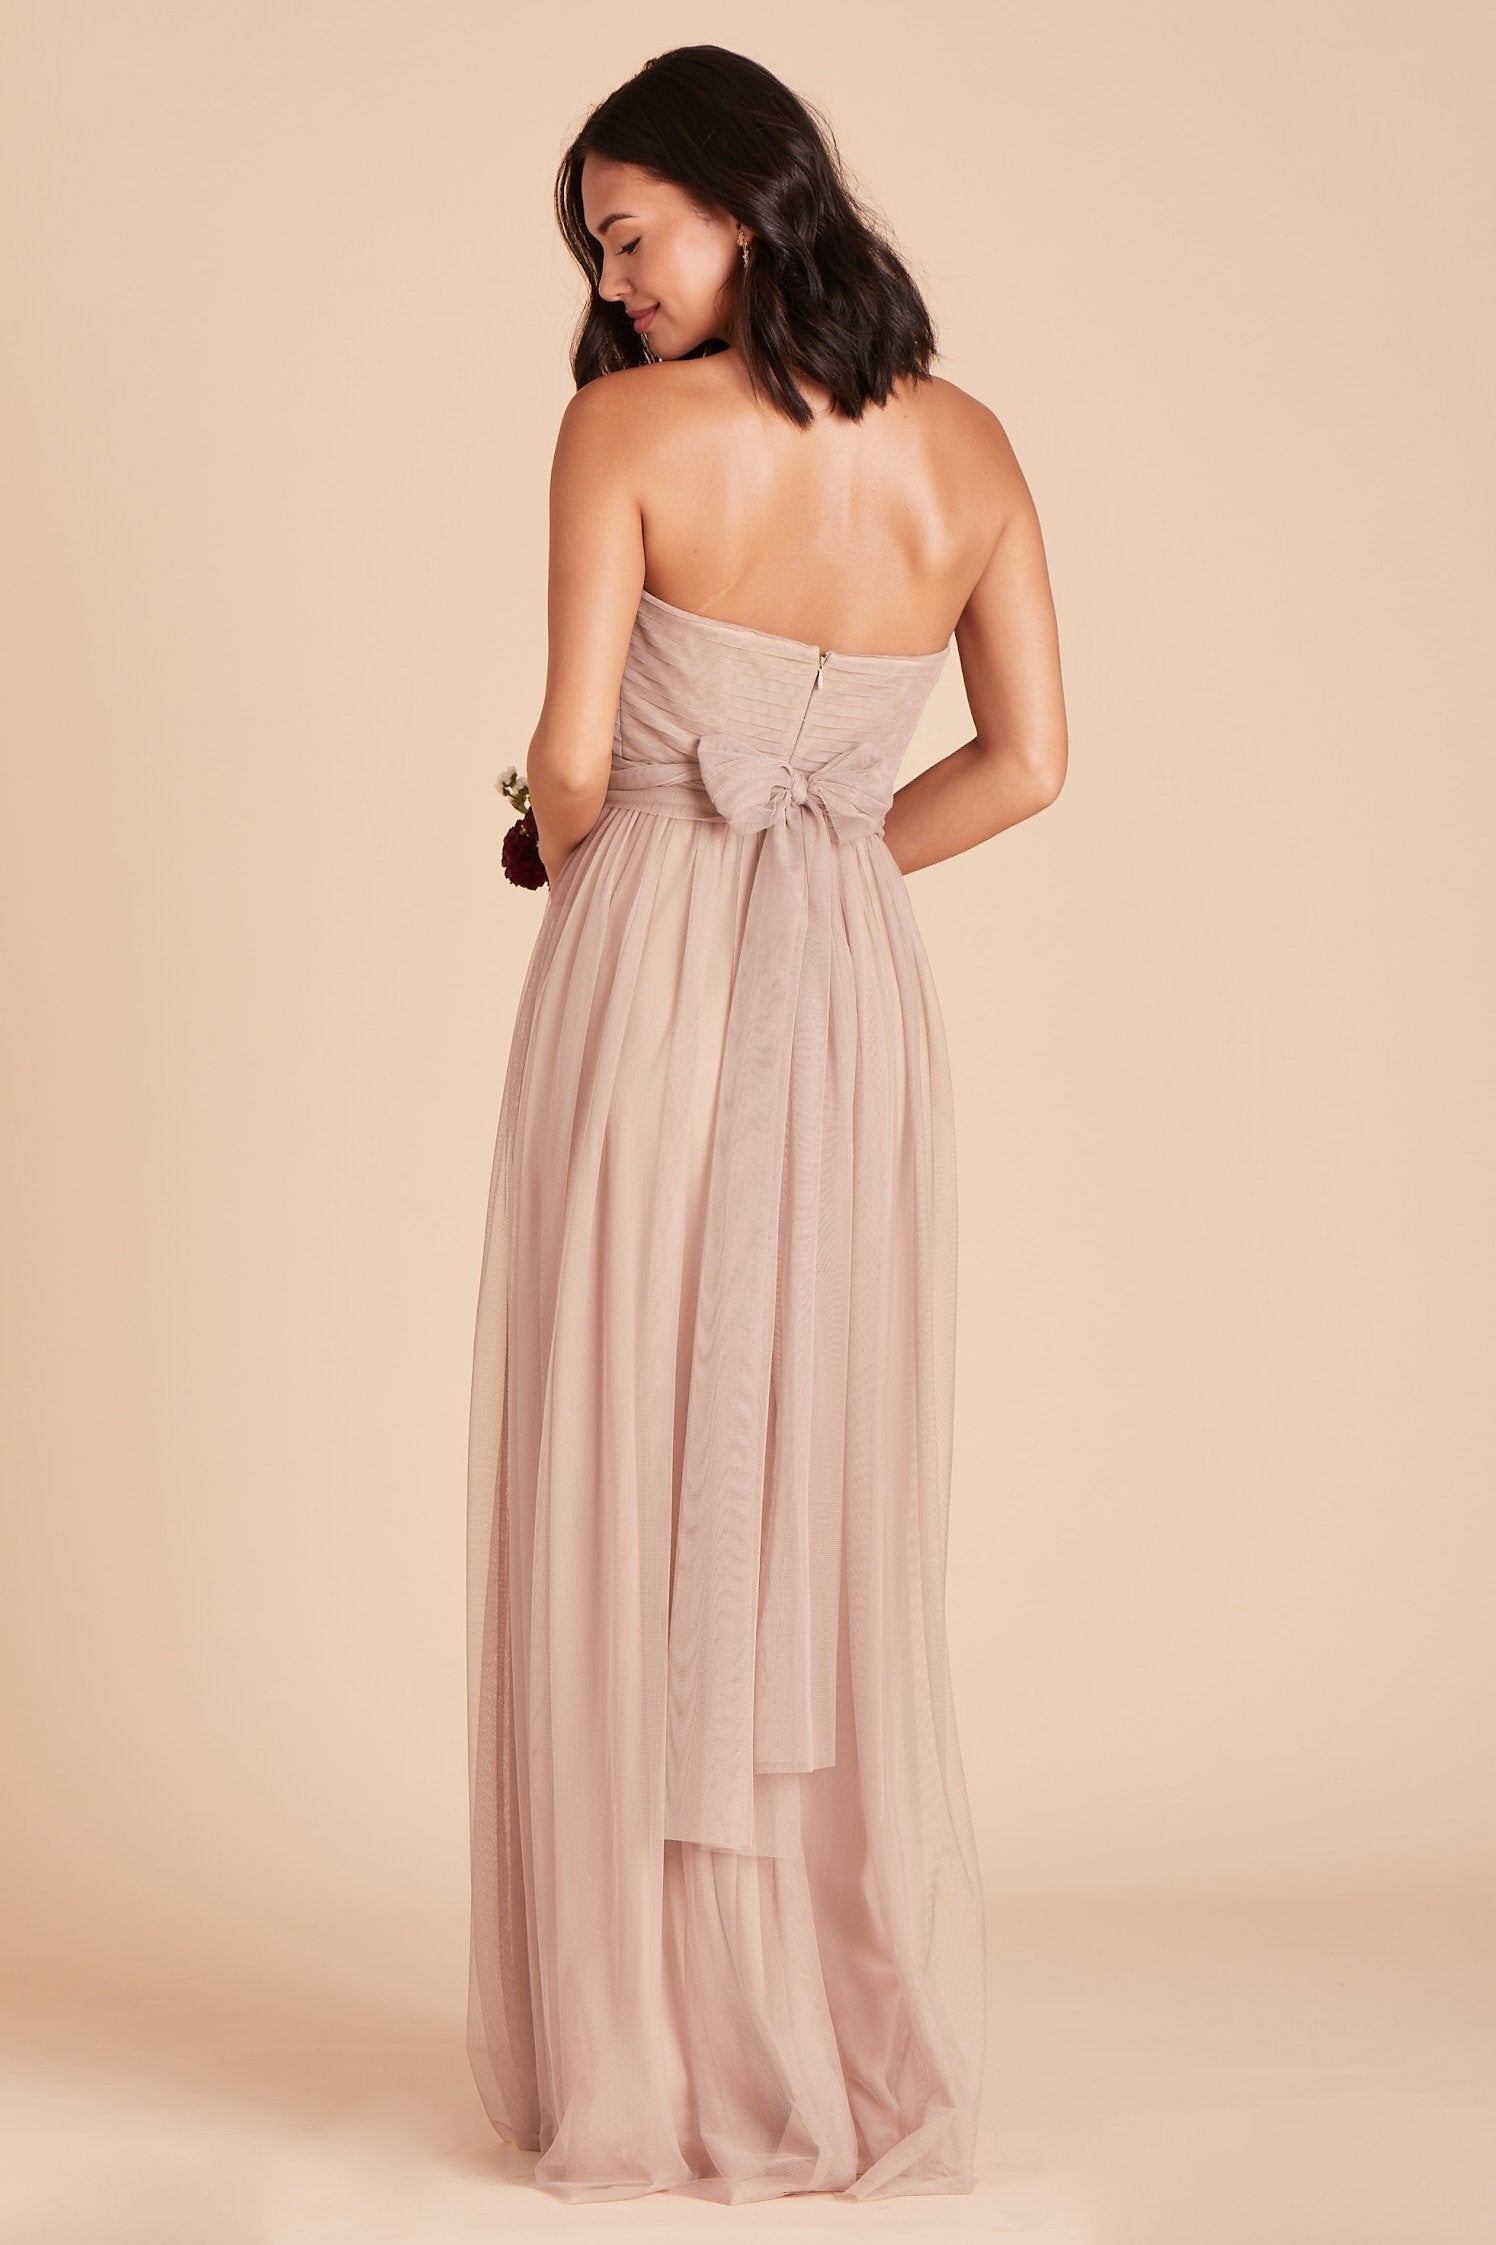 Christina convertible bridesmaid dress in sandy taupe tulle by Birdy Grey, back view